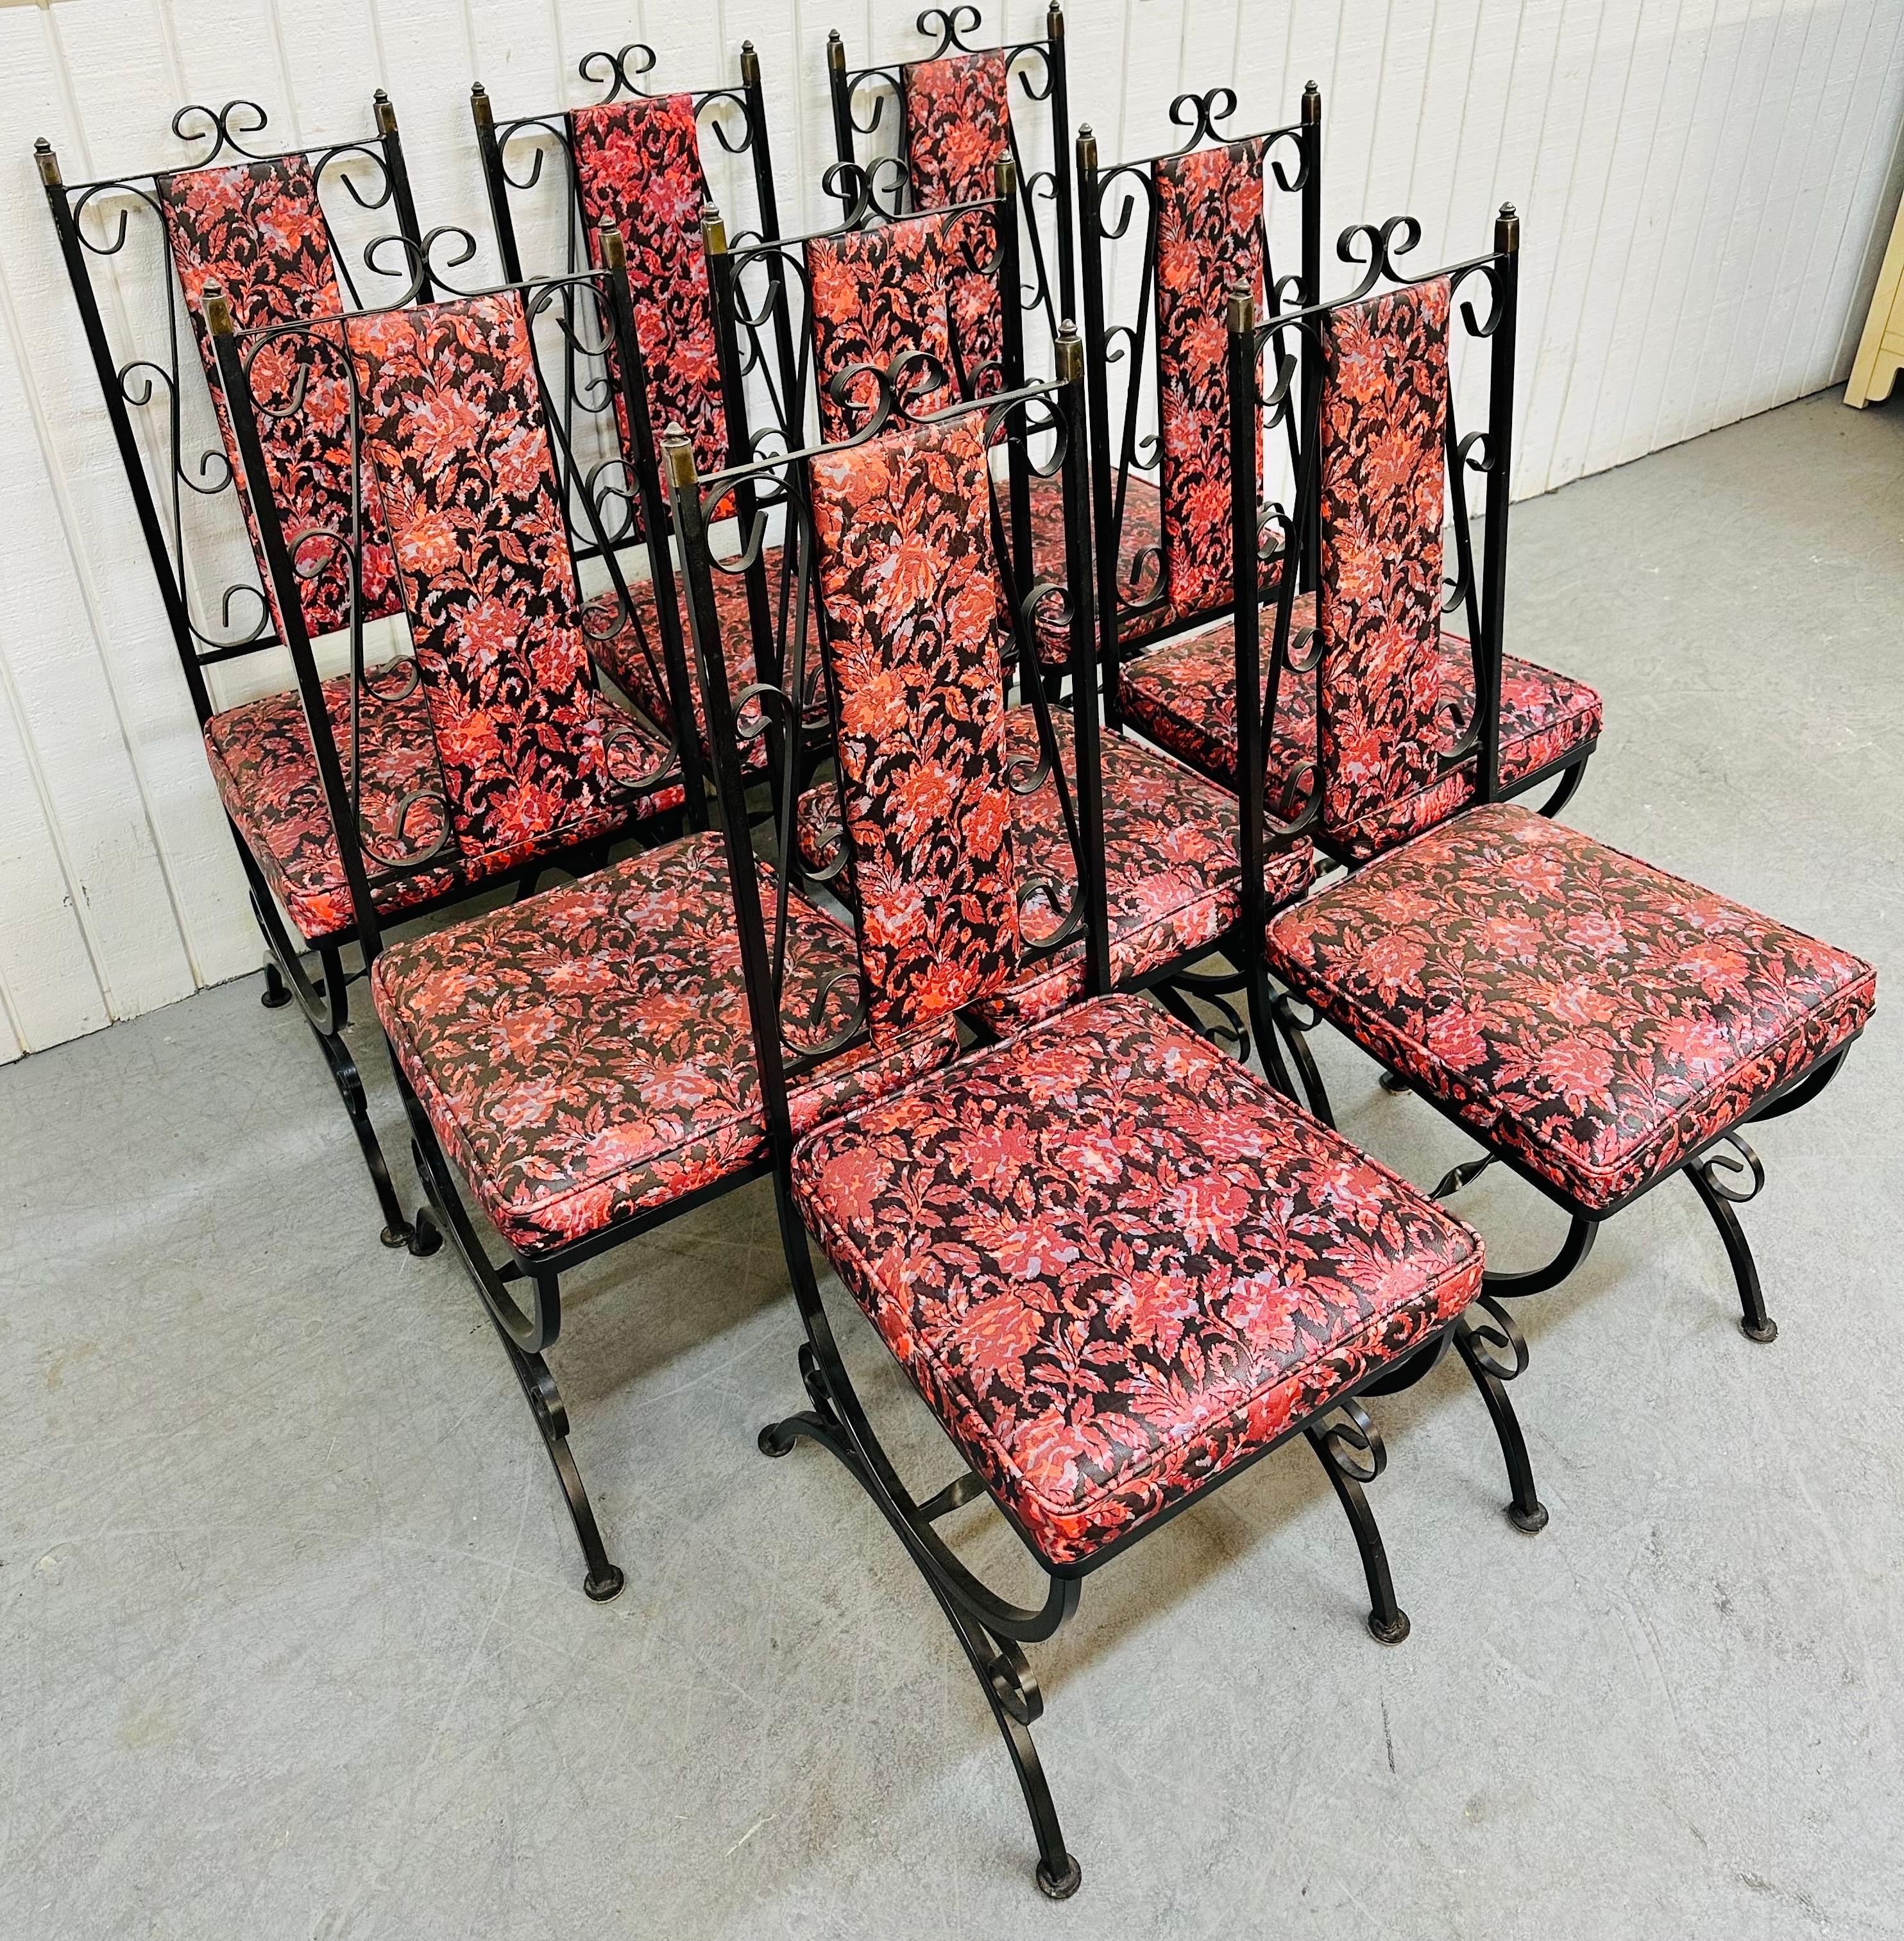 This listing is for a set of eight vintage Wrought Iron Patio chairs. Featuring eight straight chairs, wrought iron frames, original black and red floral upholstery, and brass caps at the top of each chair. This is an exceptional example of quality